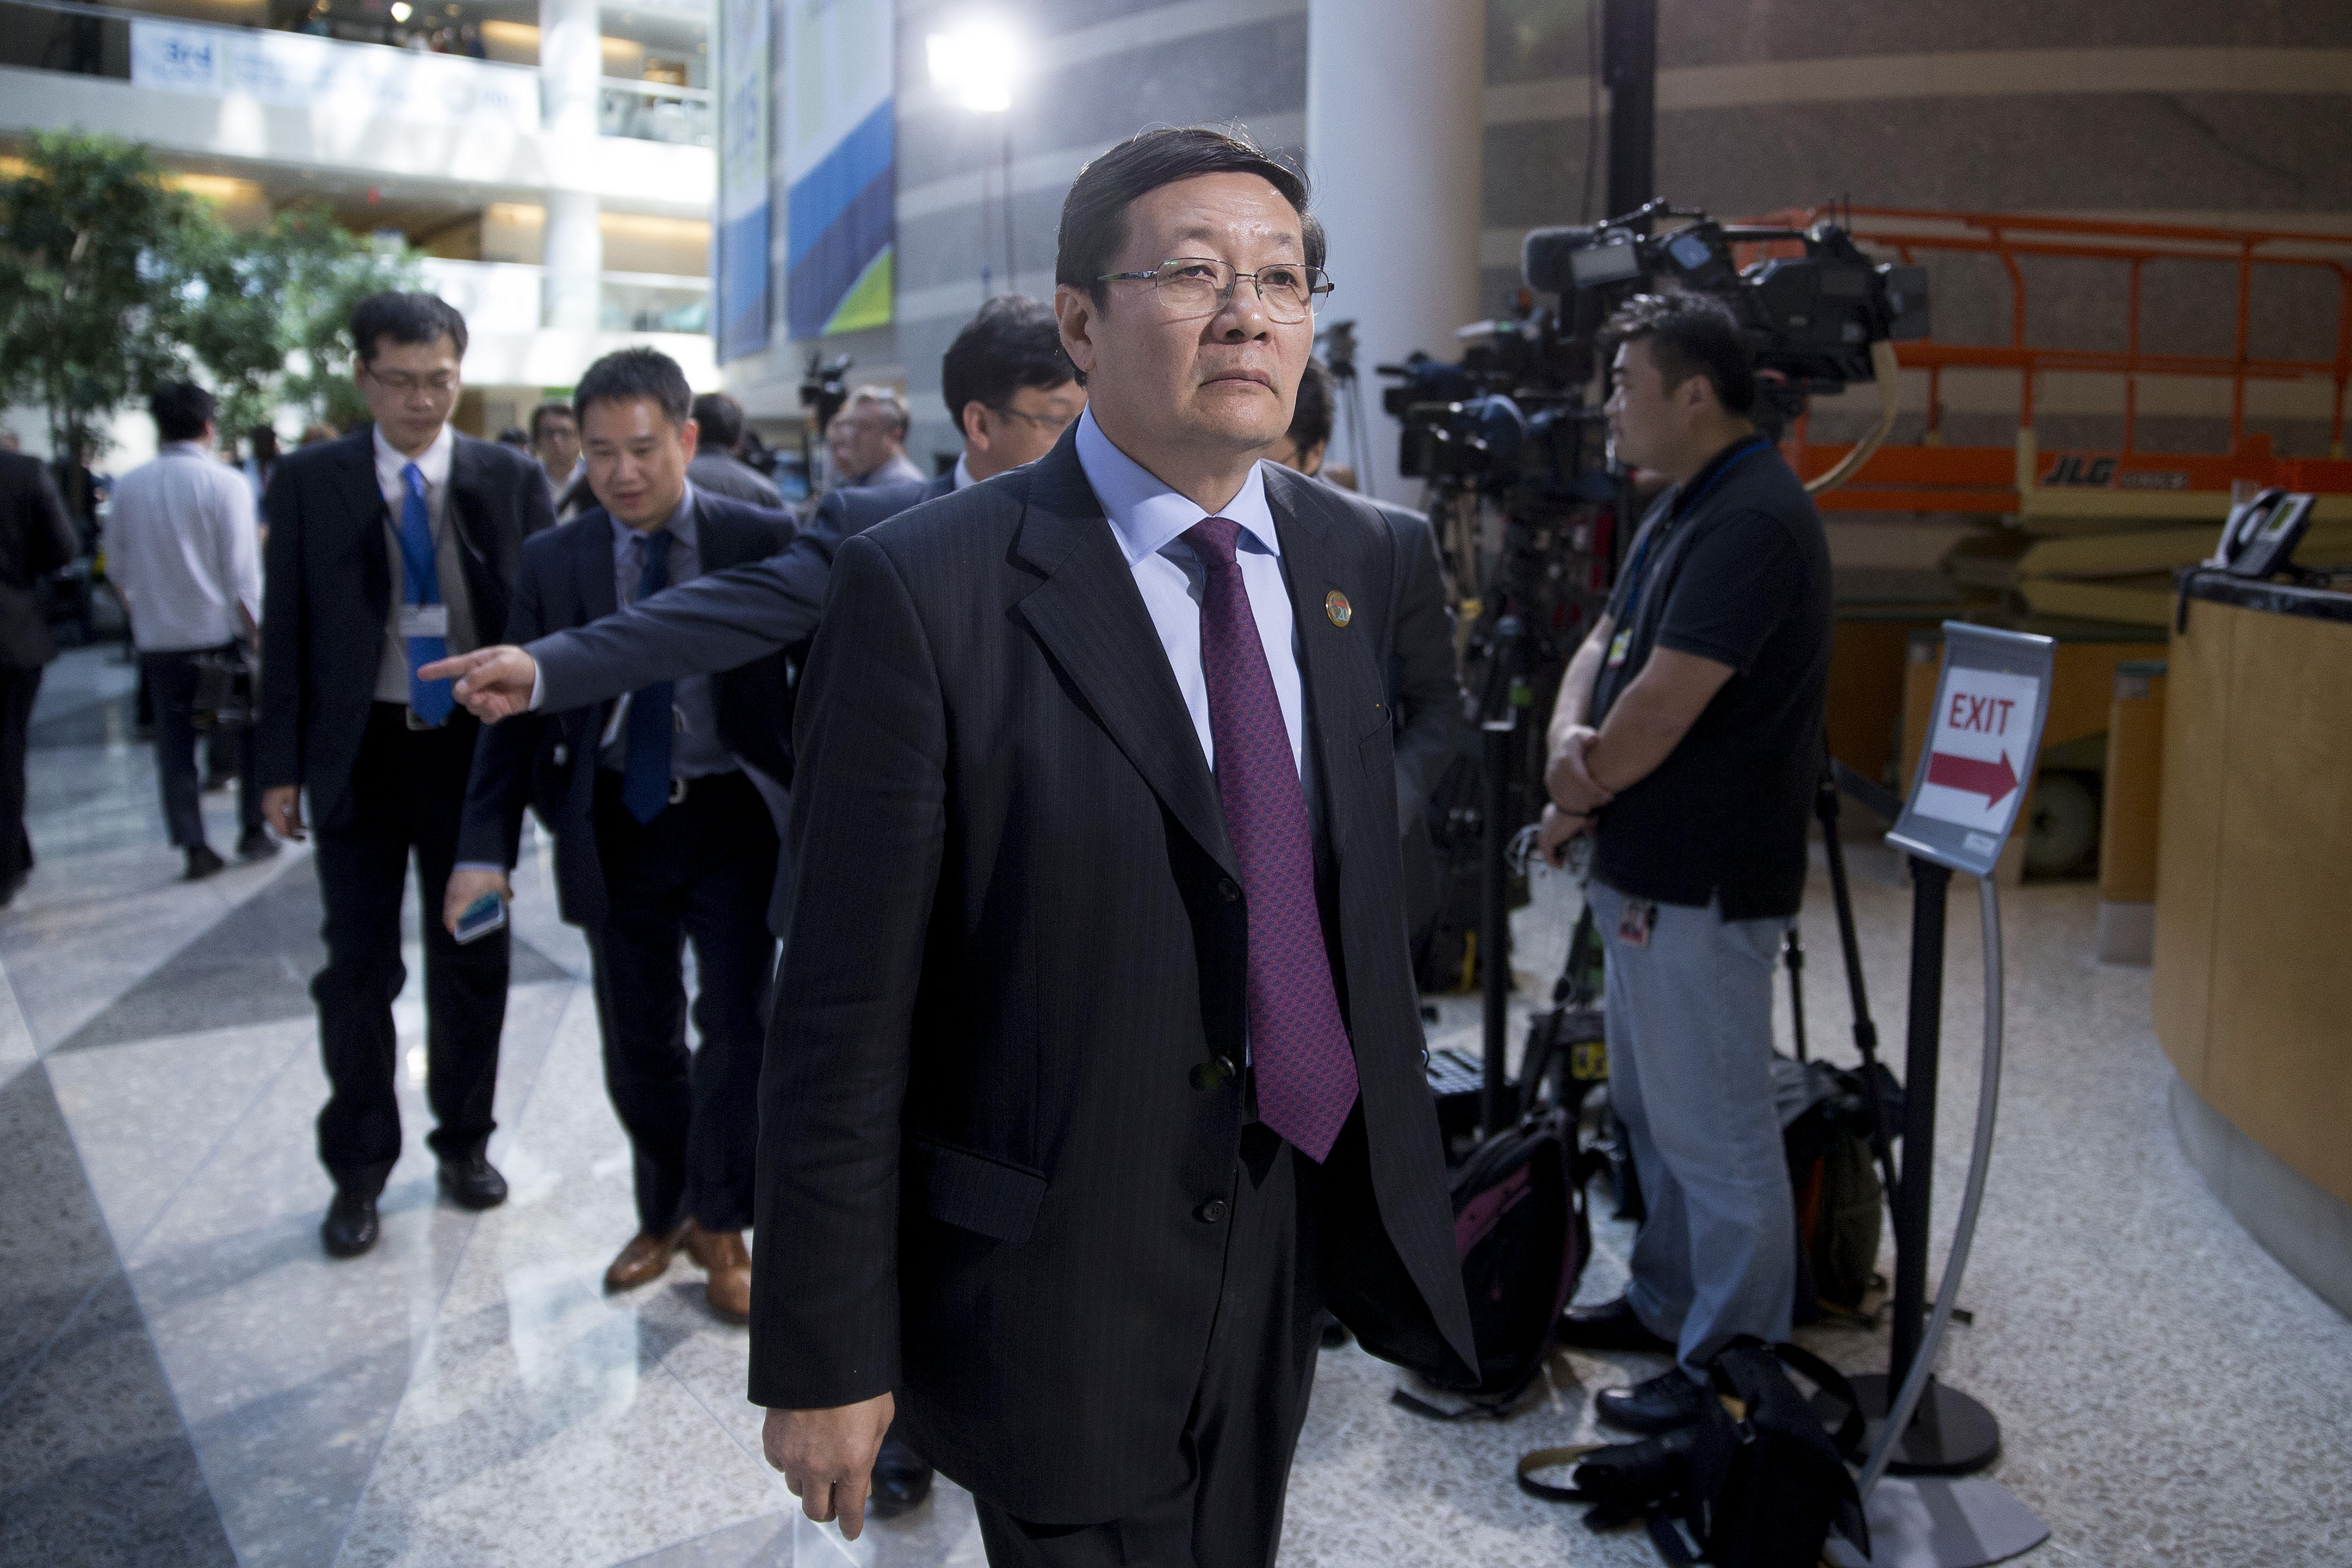 China Finance Minister Lou Jiwei attends the International Monetary Fund meetings in the US as Beijing takes steps to reshape the international financial monetary system. Photo: Bloomberg